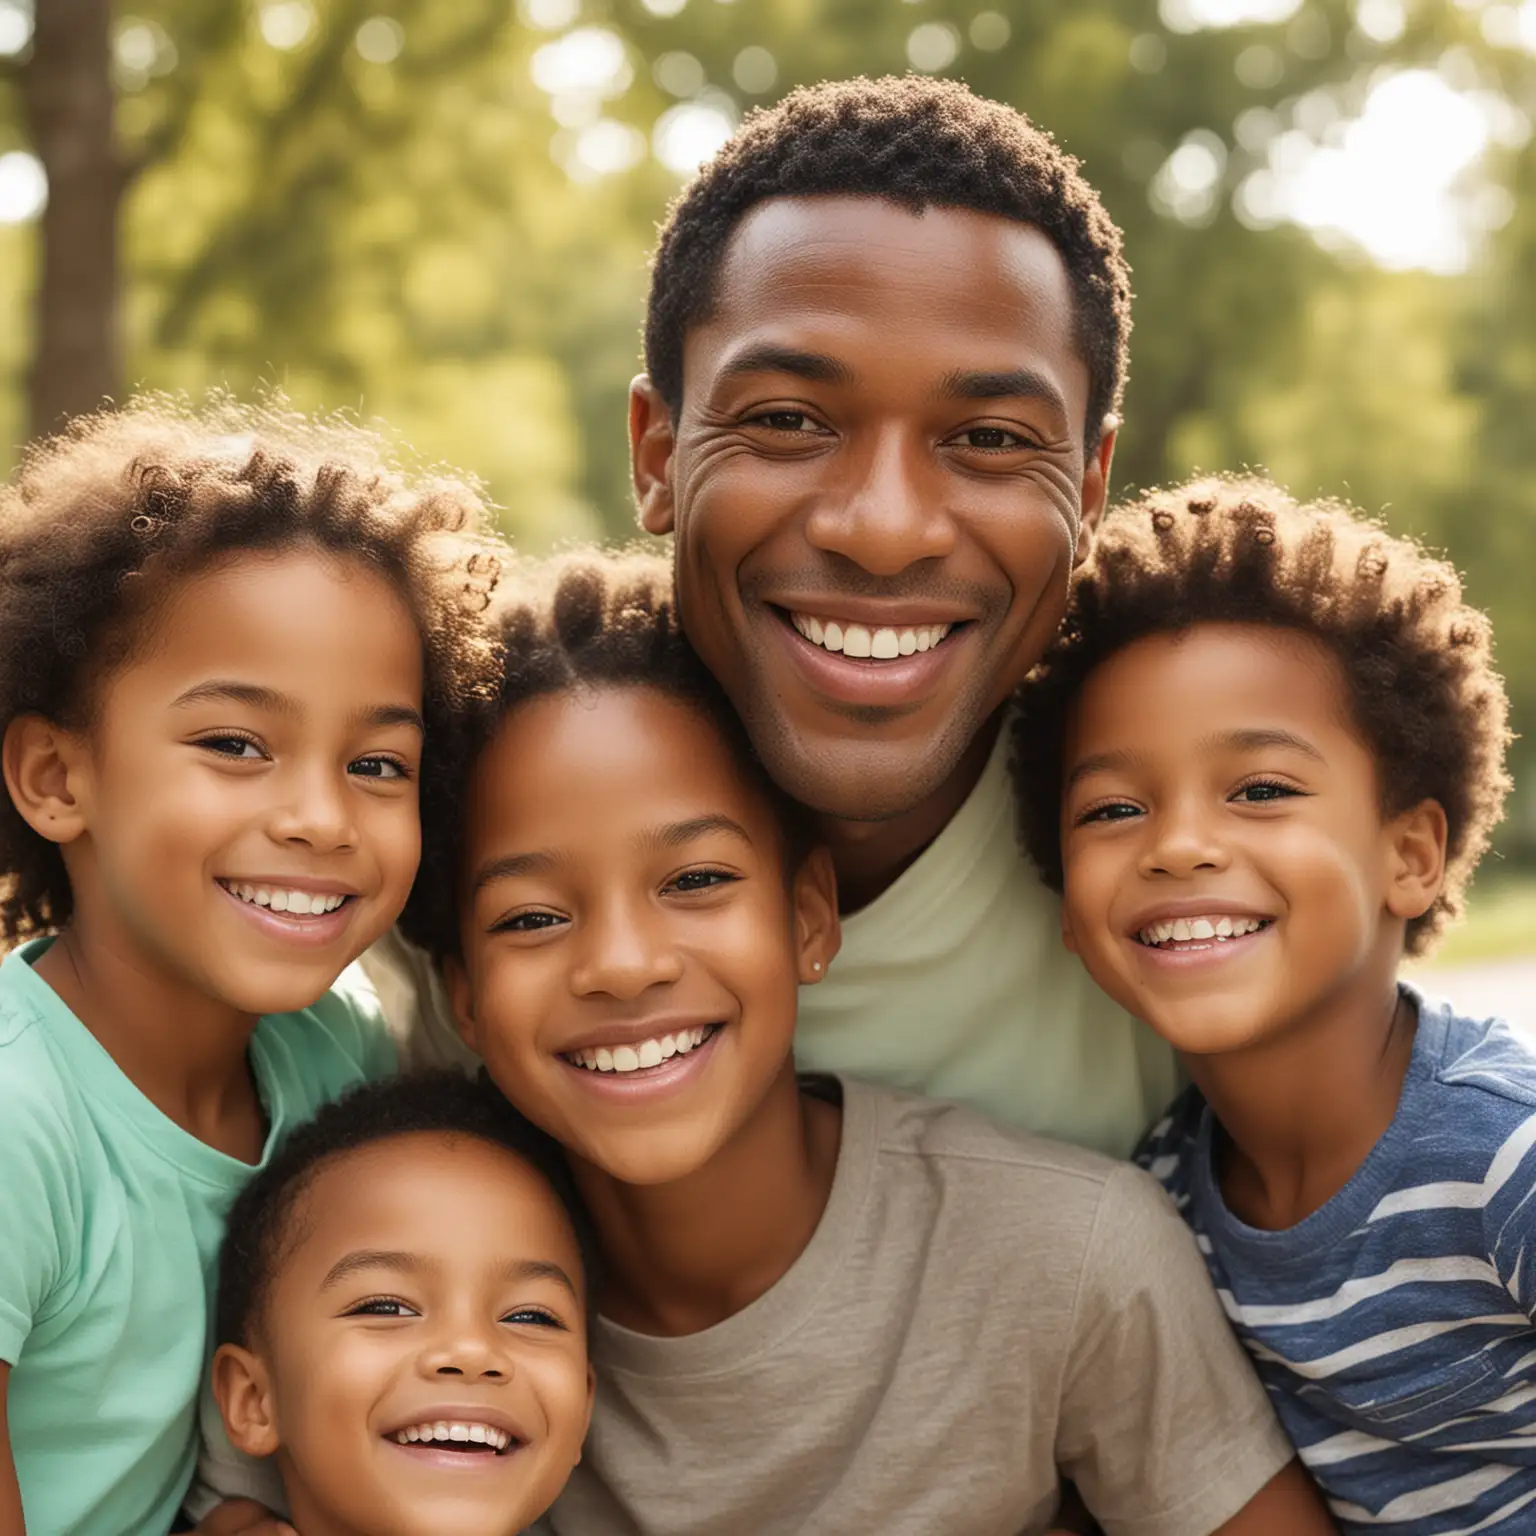 give me an image of an African-American man with kids smiling